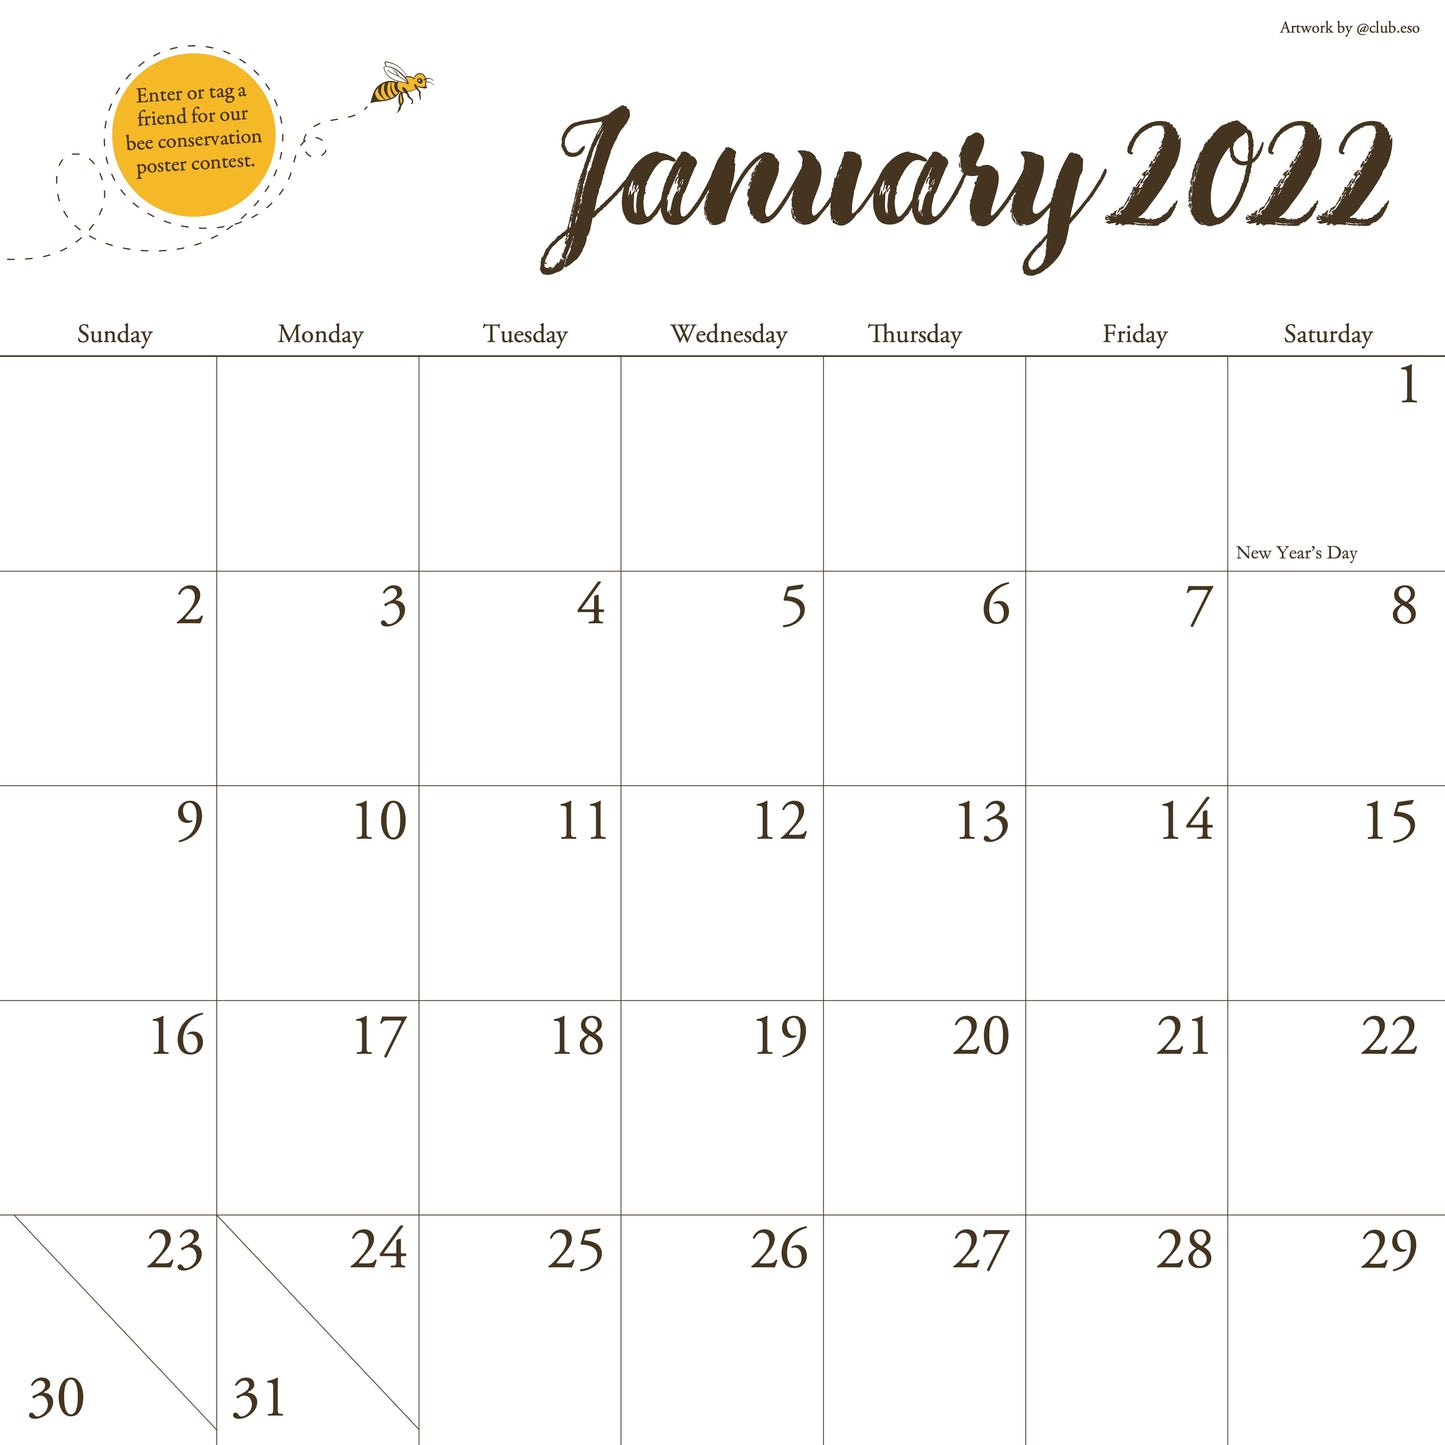 Calendar - Save Our Bees 2022